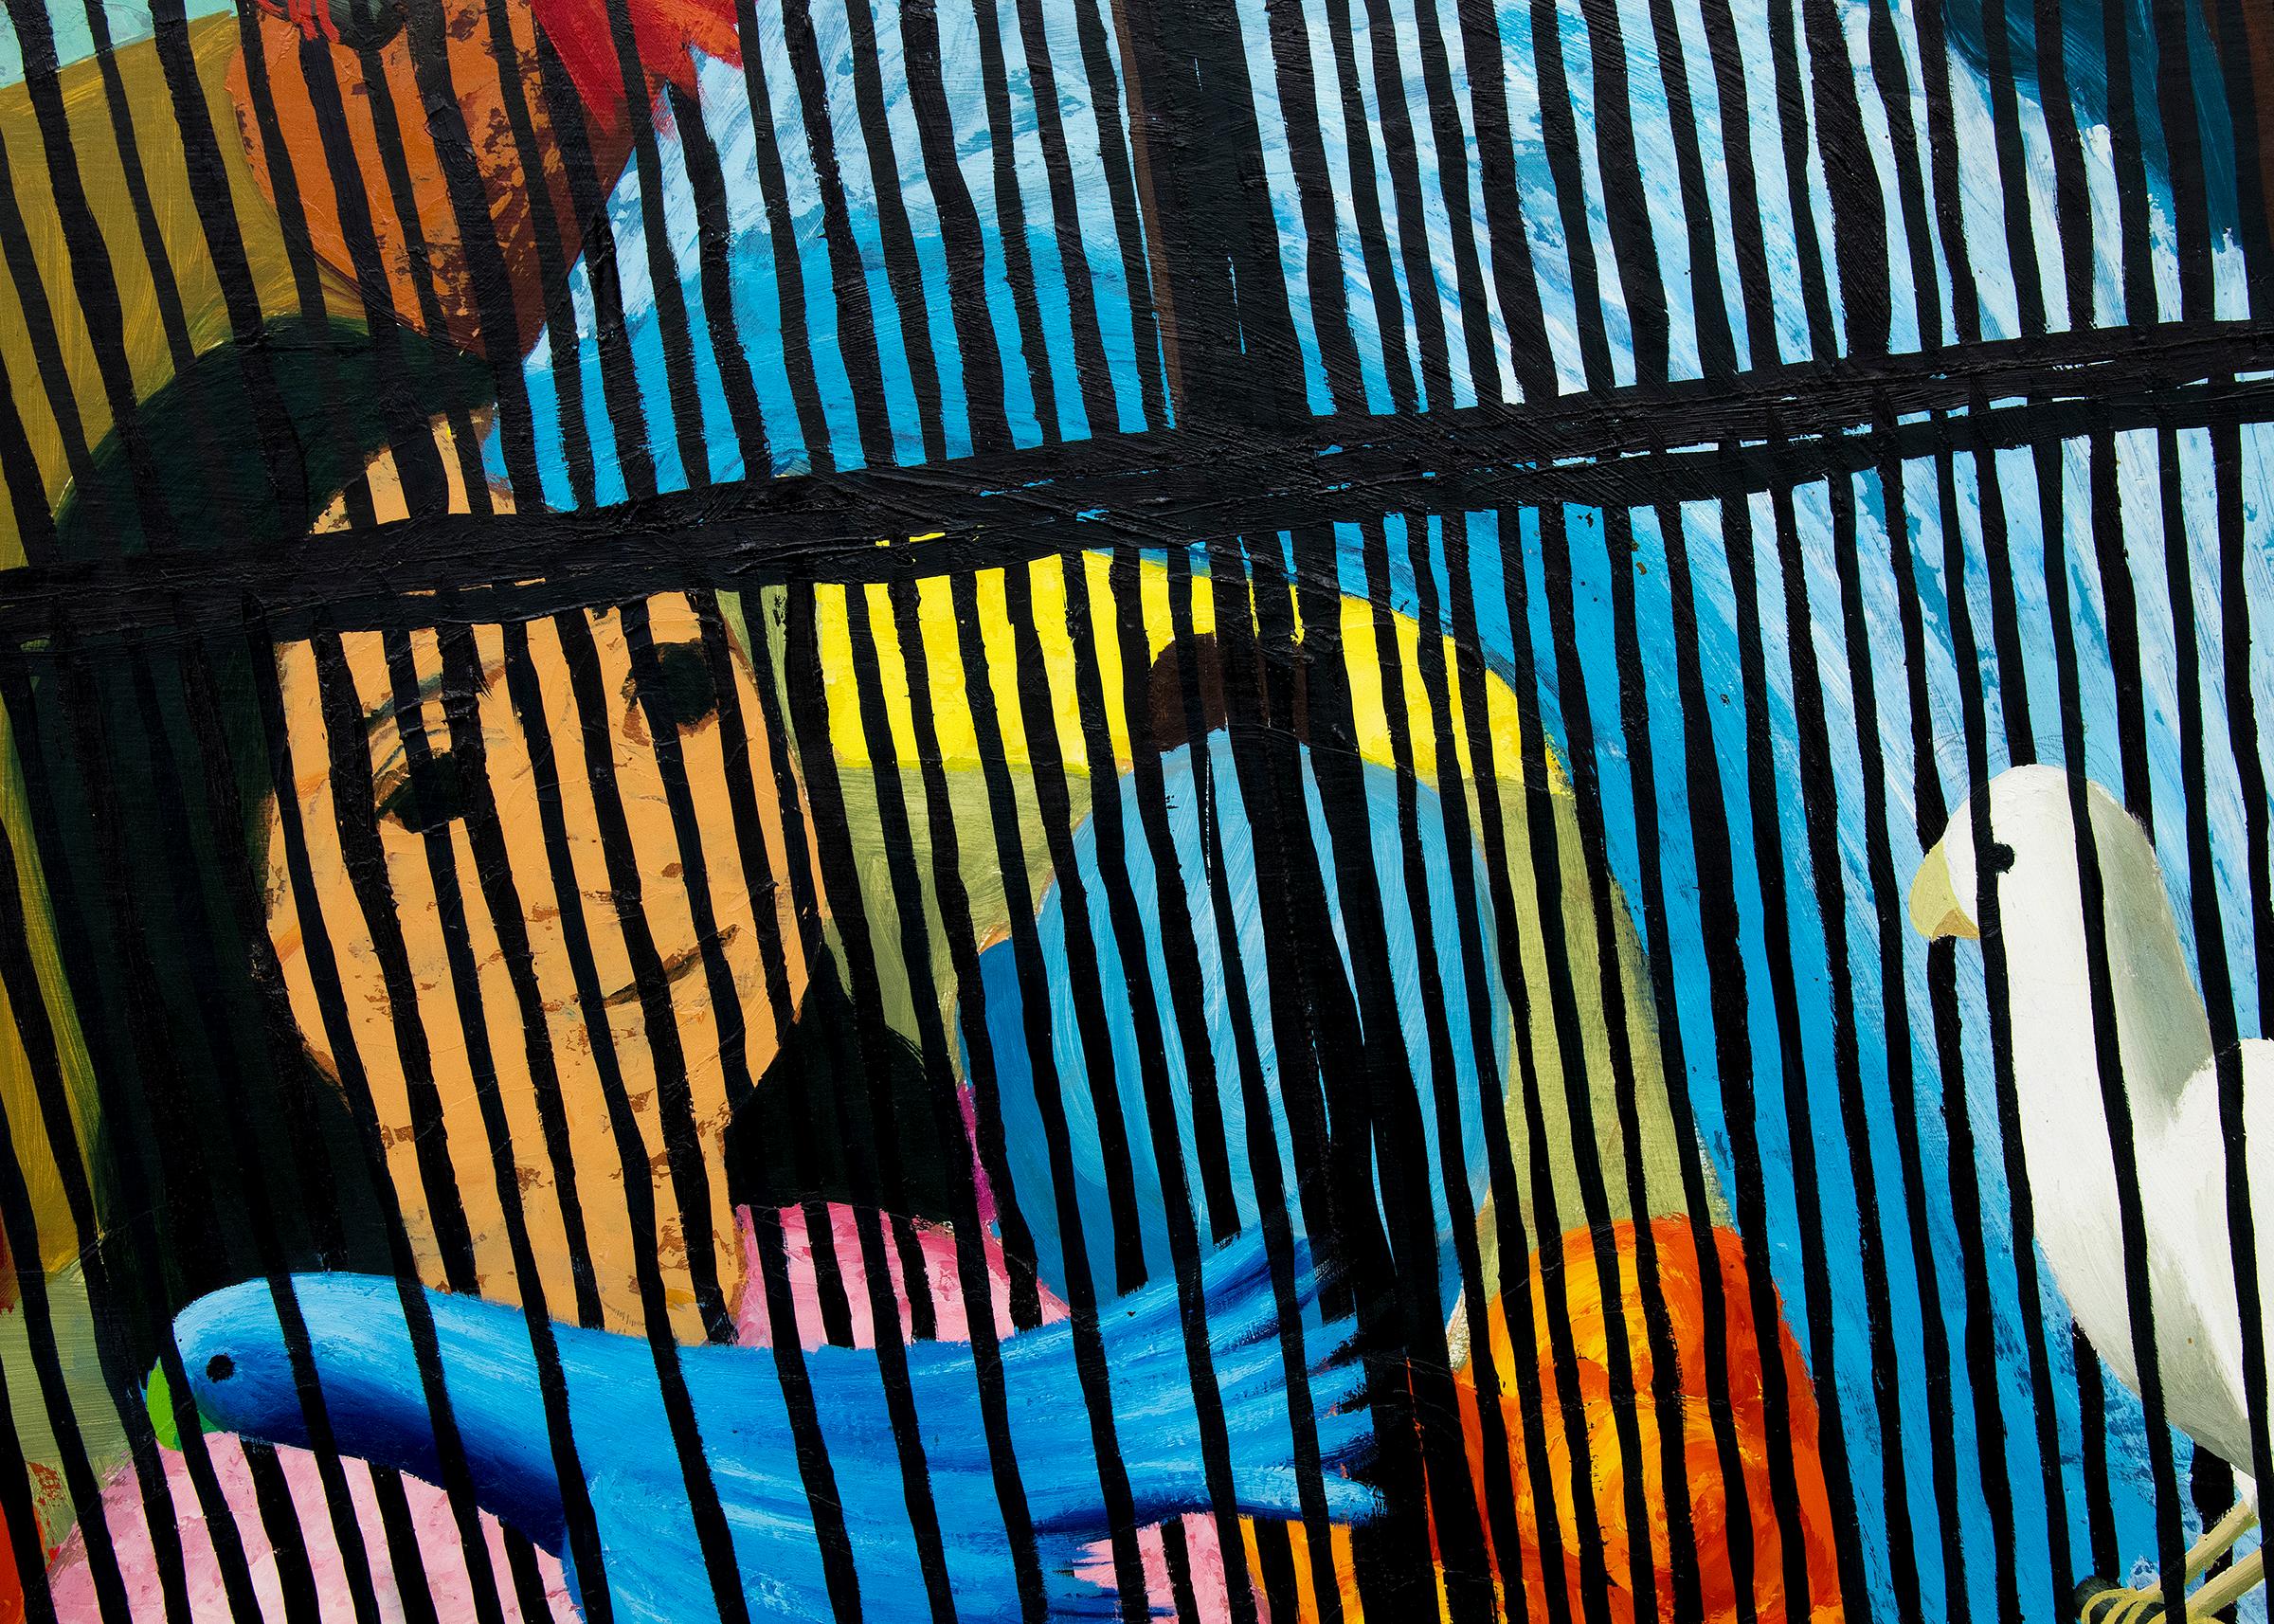 Birdcage, modernist semi-abstract 1950s oil painting with a make and female figure with birds by Denver artist, Angelo Di Benedetto (1913-1992). Bright colors of yellow, red, blue, pink, black and white. Vintage 1957, oil on board, signed and dated